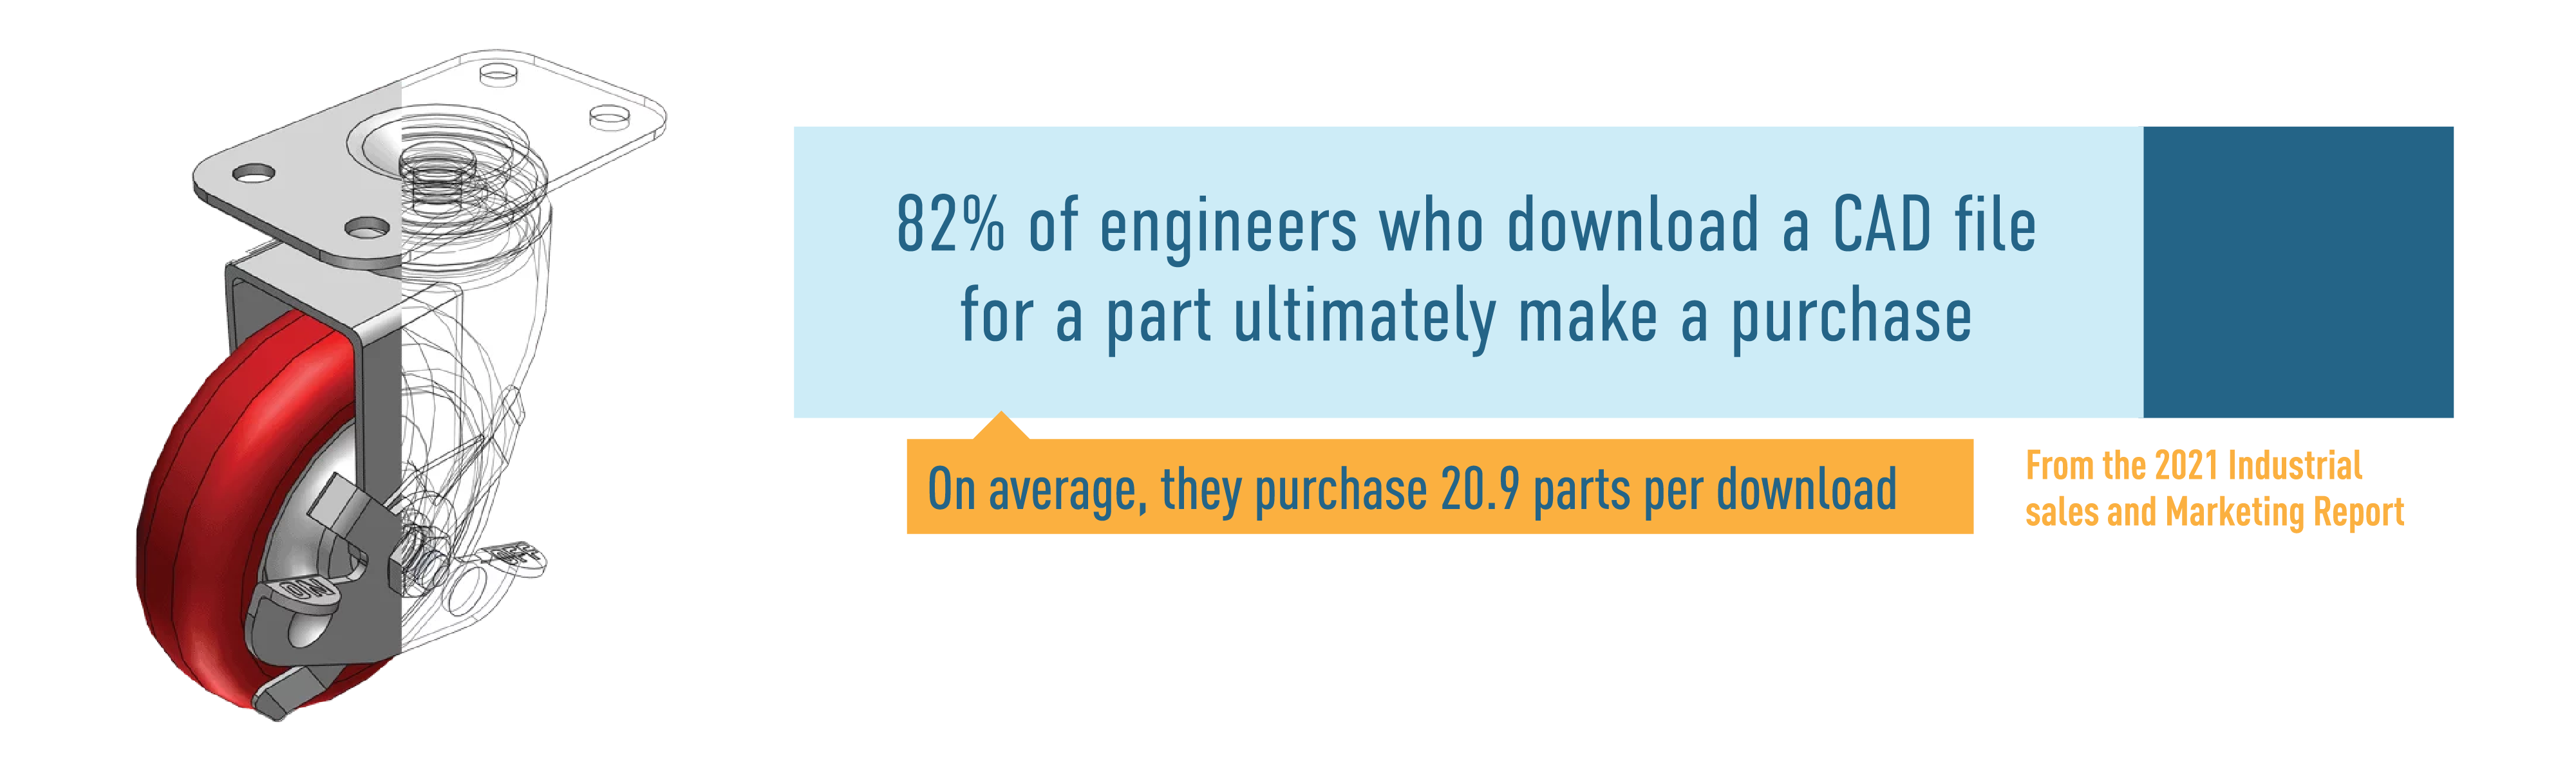 82% of engineers that specify parts make a purchase